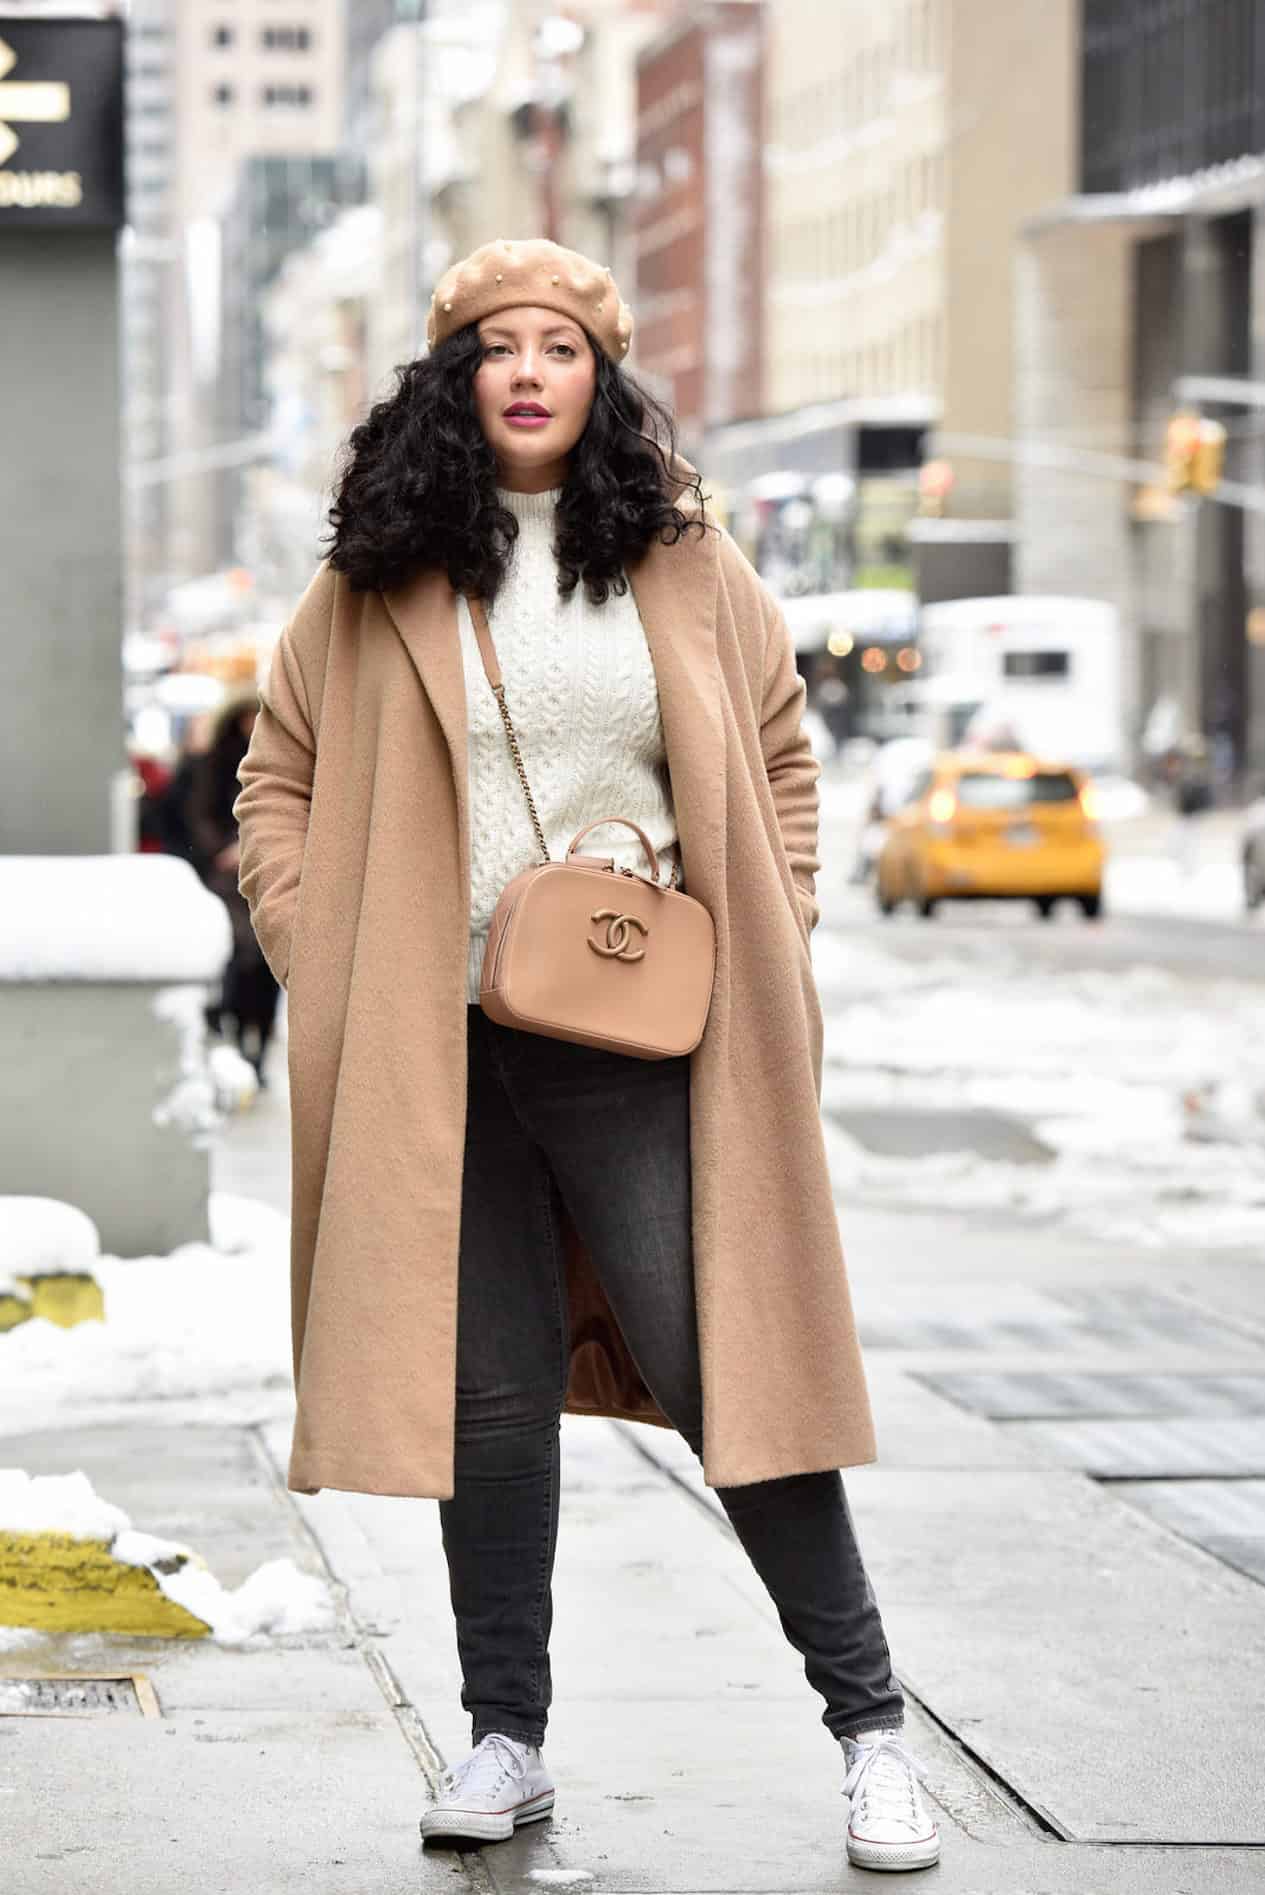 Young woman in black skinny jeans and camel colored coat poses outside in the city.